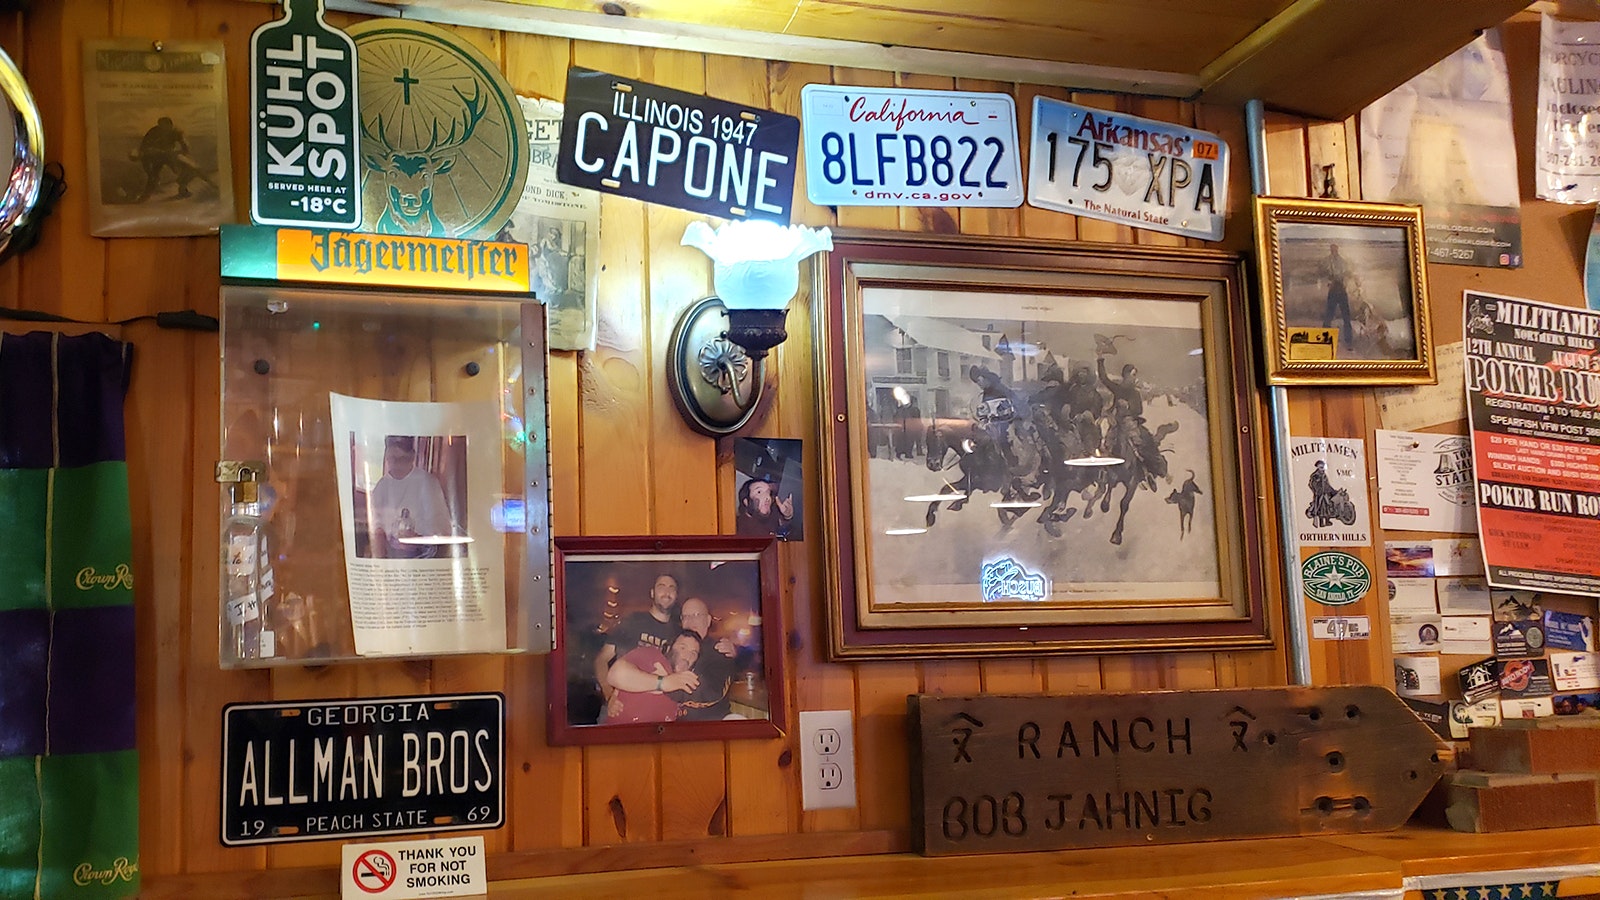 License plates photos and Henry Hill's whiskey flask.